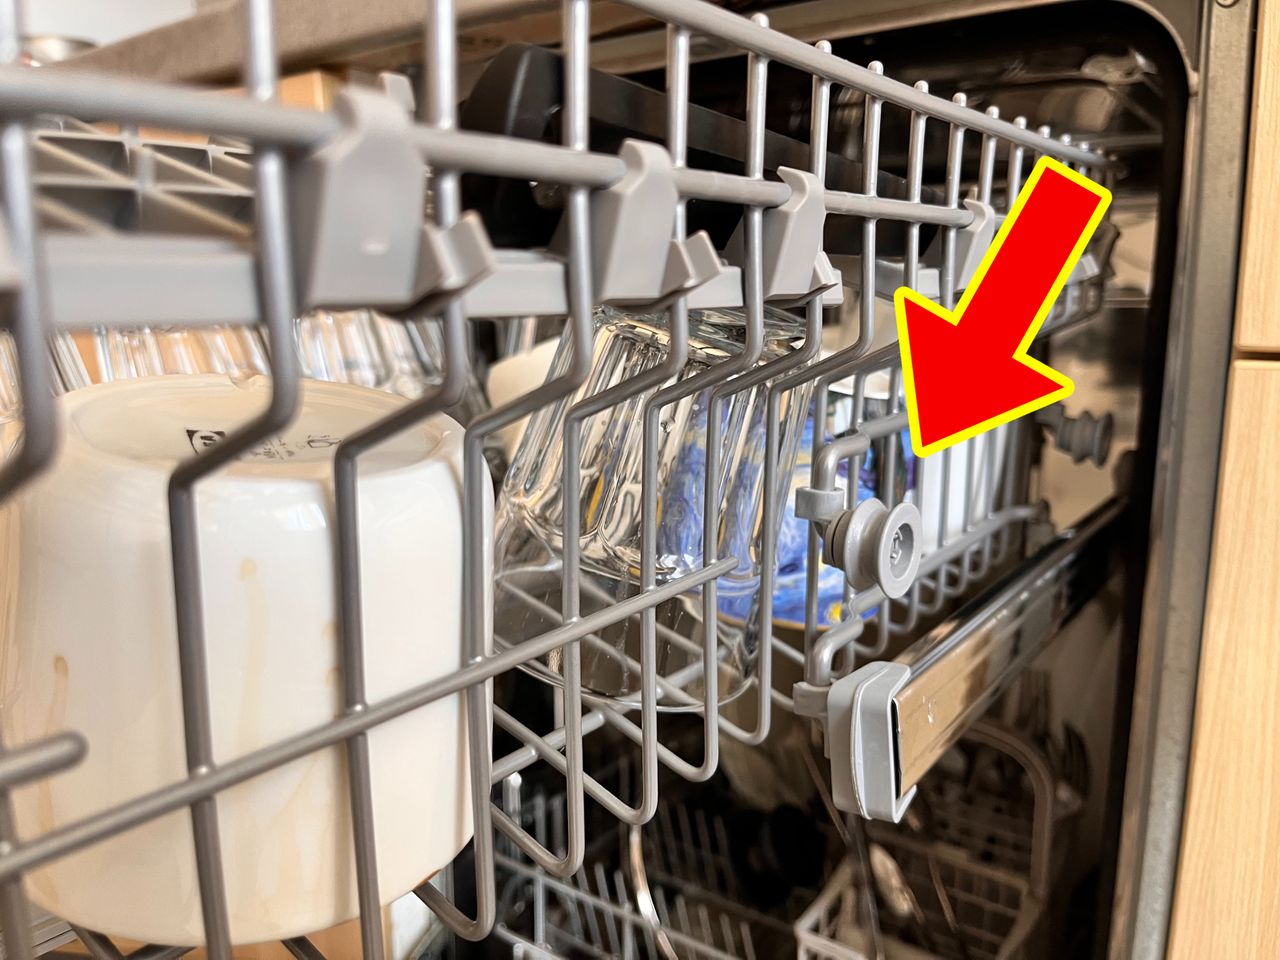 Fix your dishwasher's wet dishes problem with this simple hack